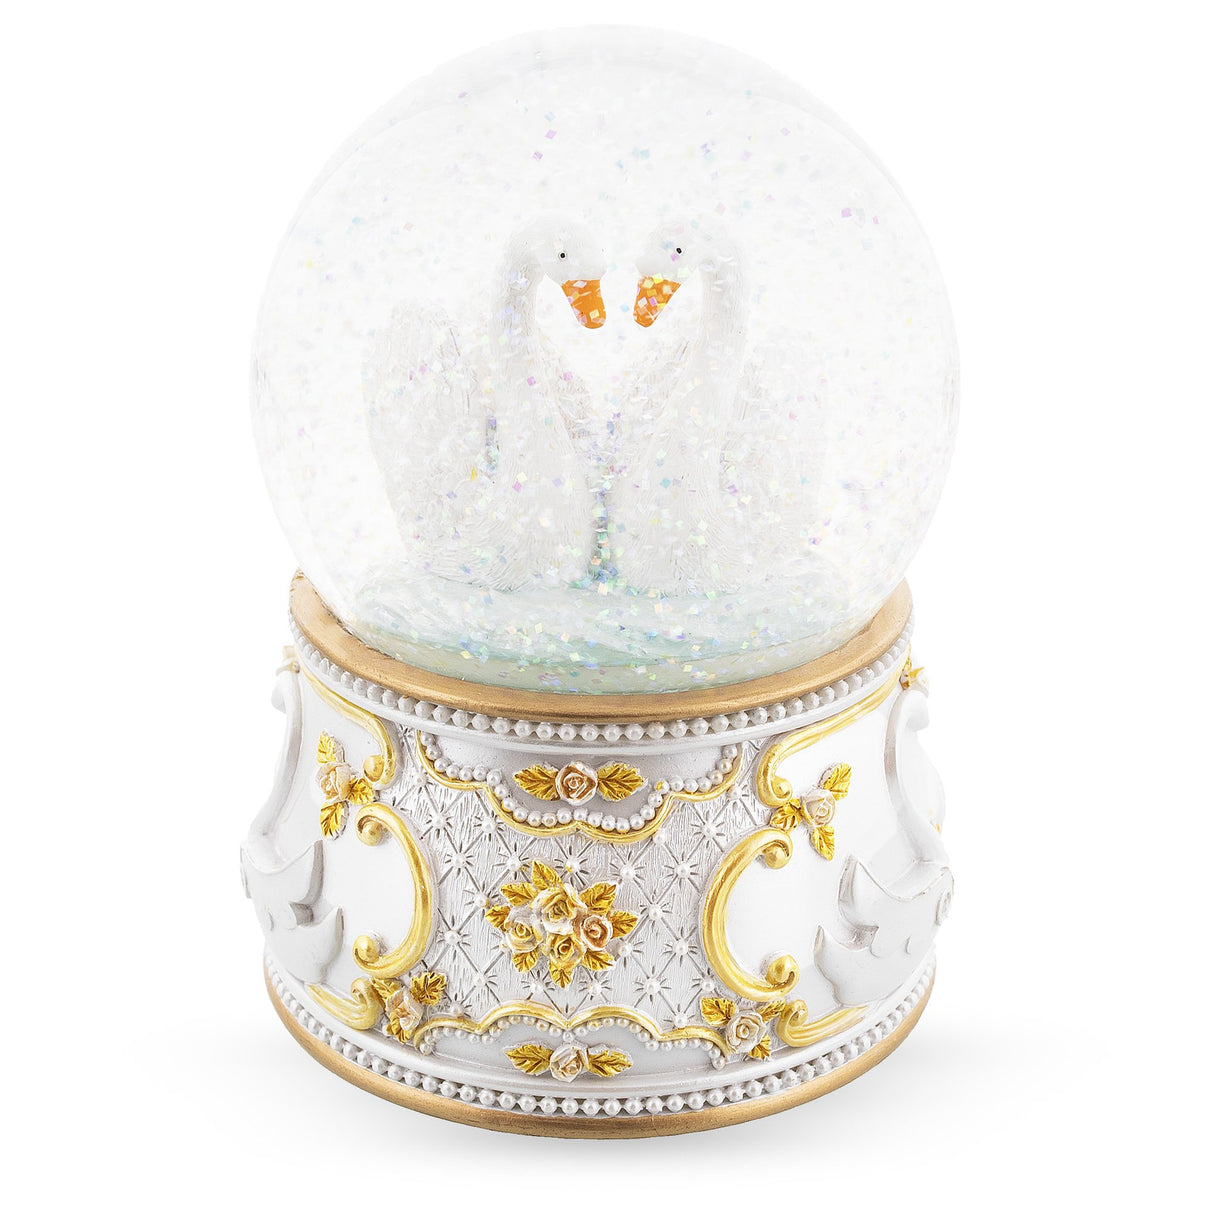 Enchanted Swans in Motion: Spinning Musical Water Snow Globe ,dimensions in inches: 6 x 4.1 x 4.1